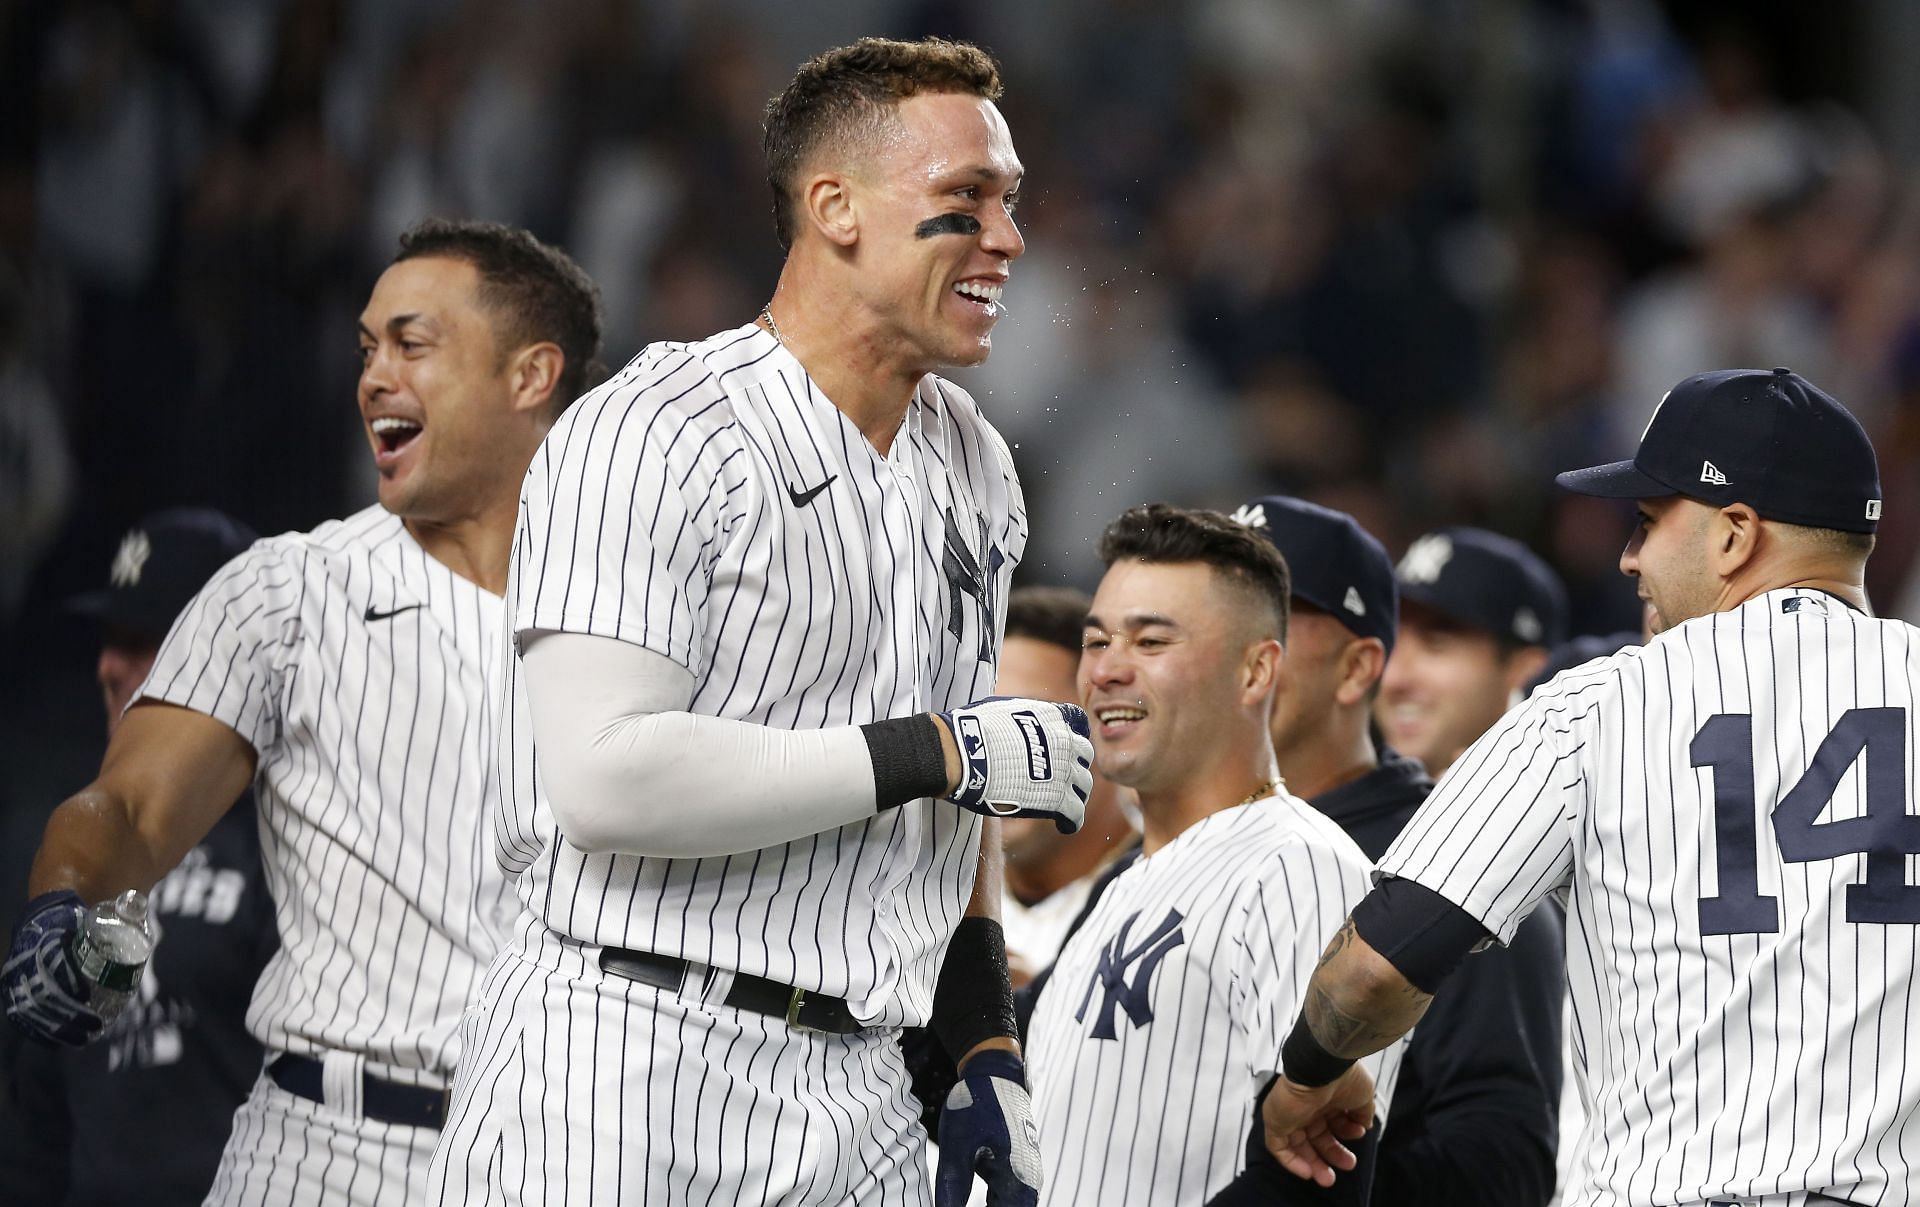 The New York Yankees celebrate a walkoff win